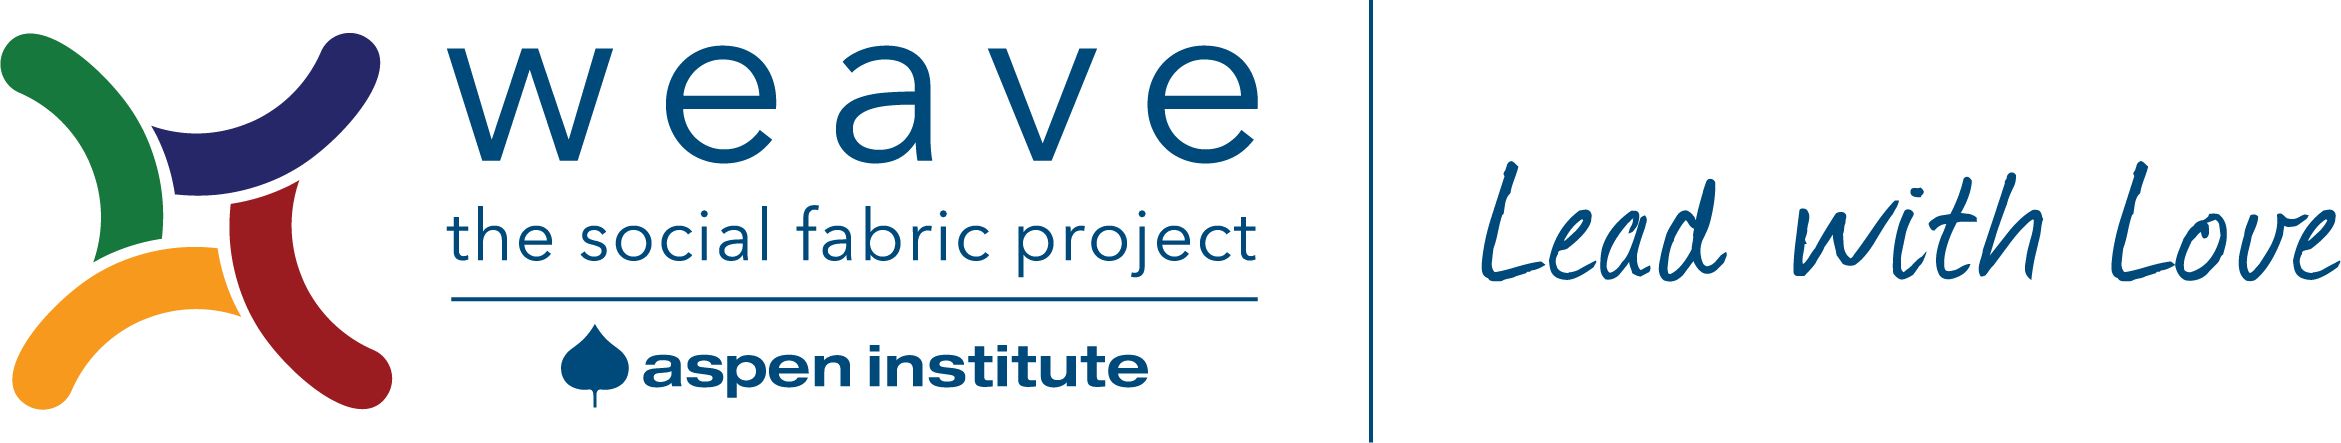 Weave: the social fabric project logo